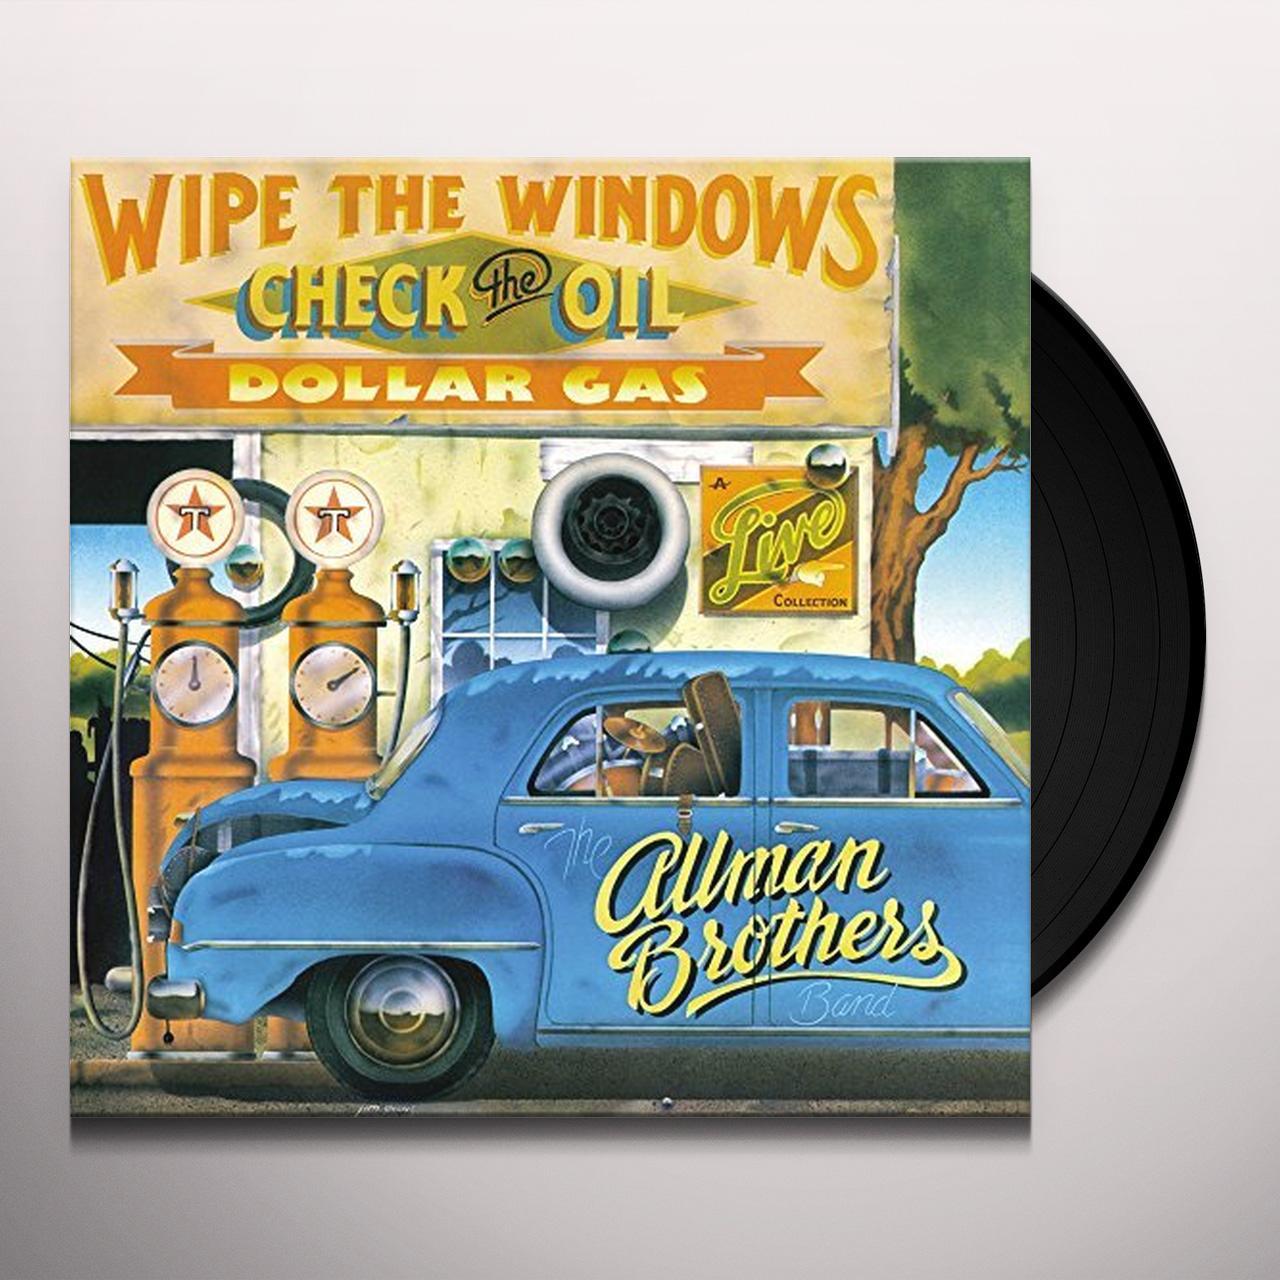 Allman Brothers Band - Wipe The Windows, Check The Oil, A Dollar Gas